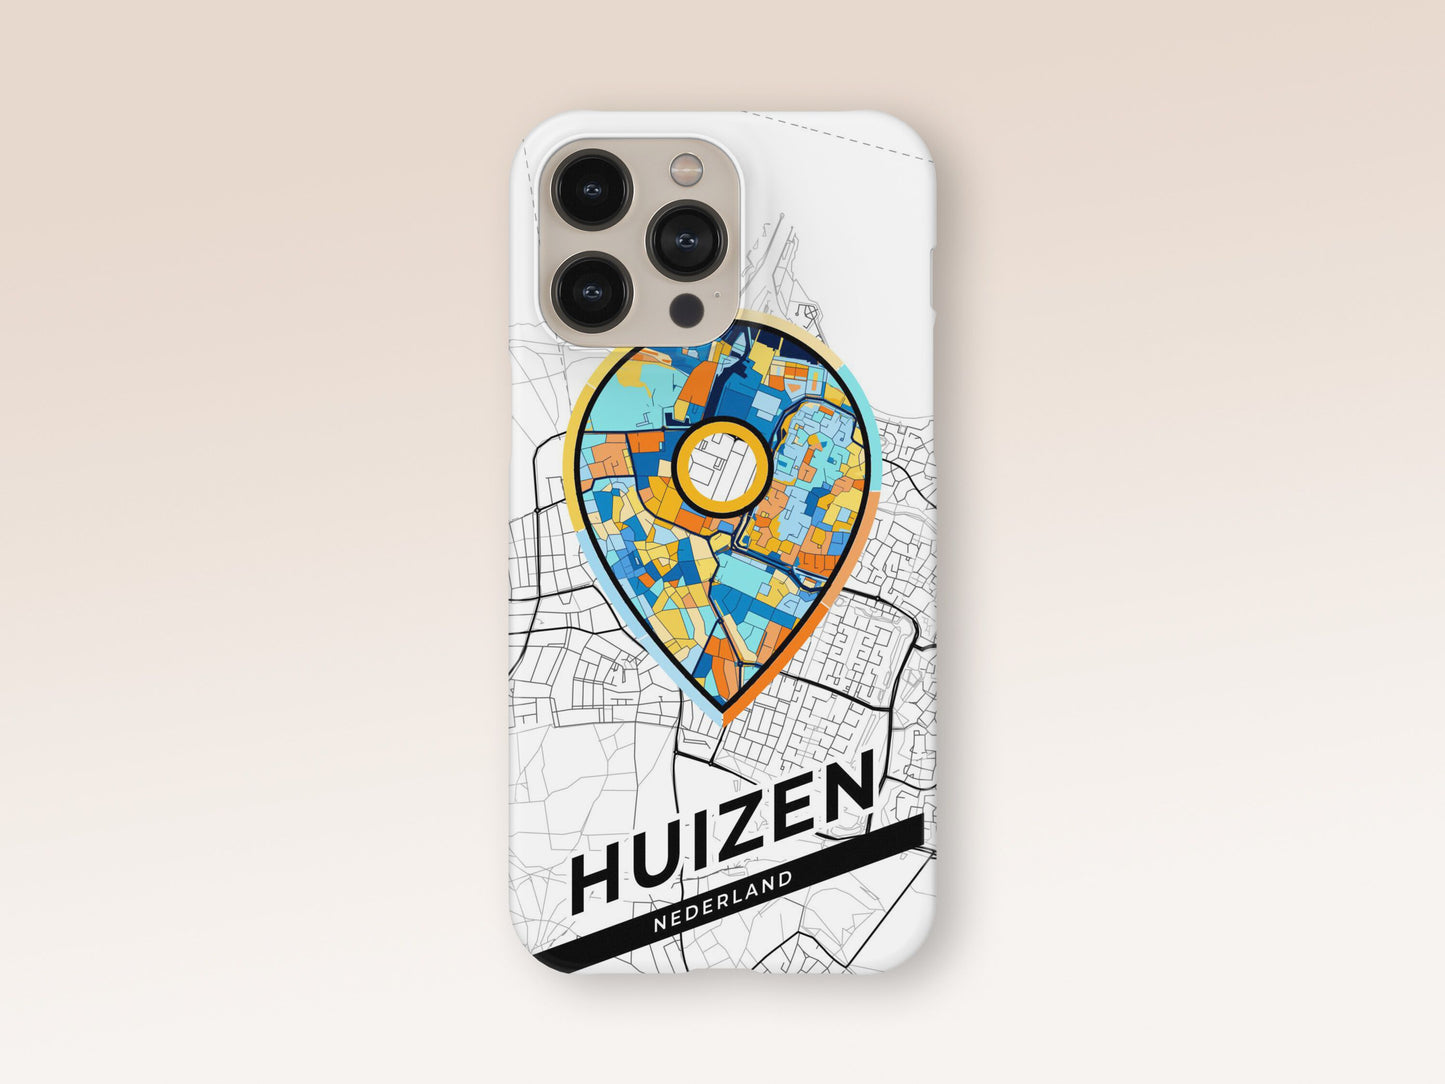 Huizen Netherlands slim phone case with colorful icon. Birthday, wedding or housewarming gift. Couple match cases. 1